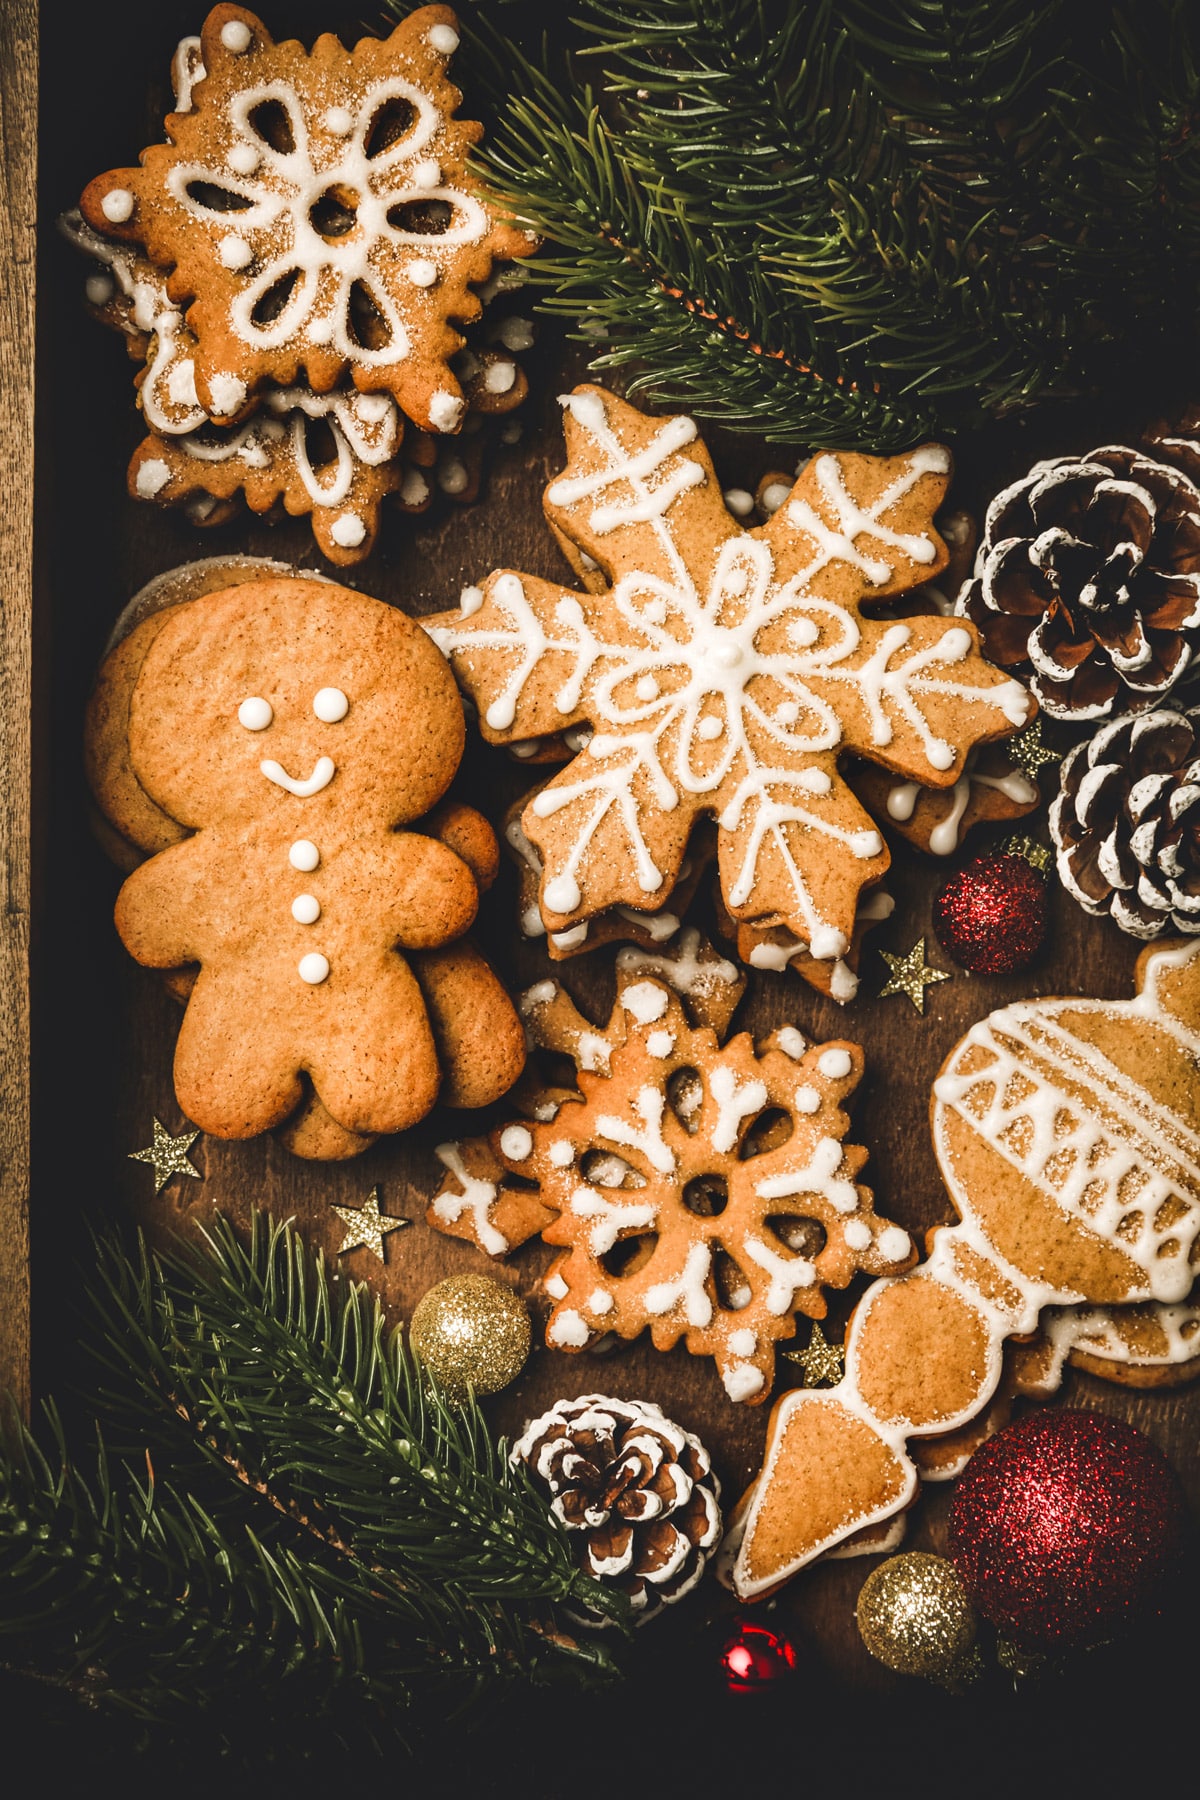 Gingerbread cookies with royal icing recipe